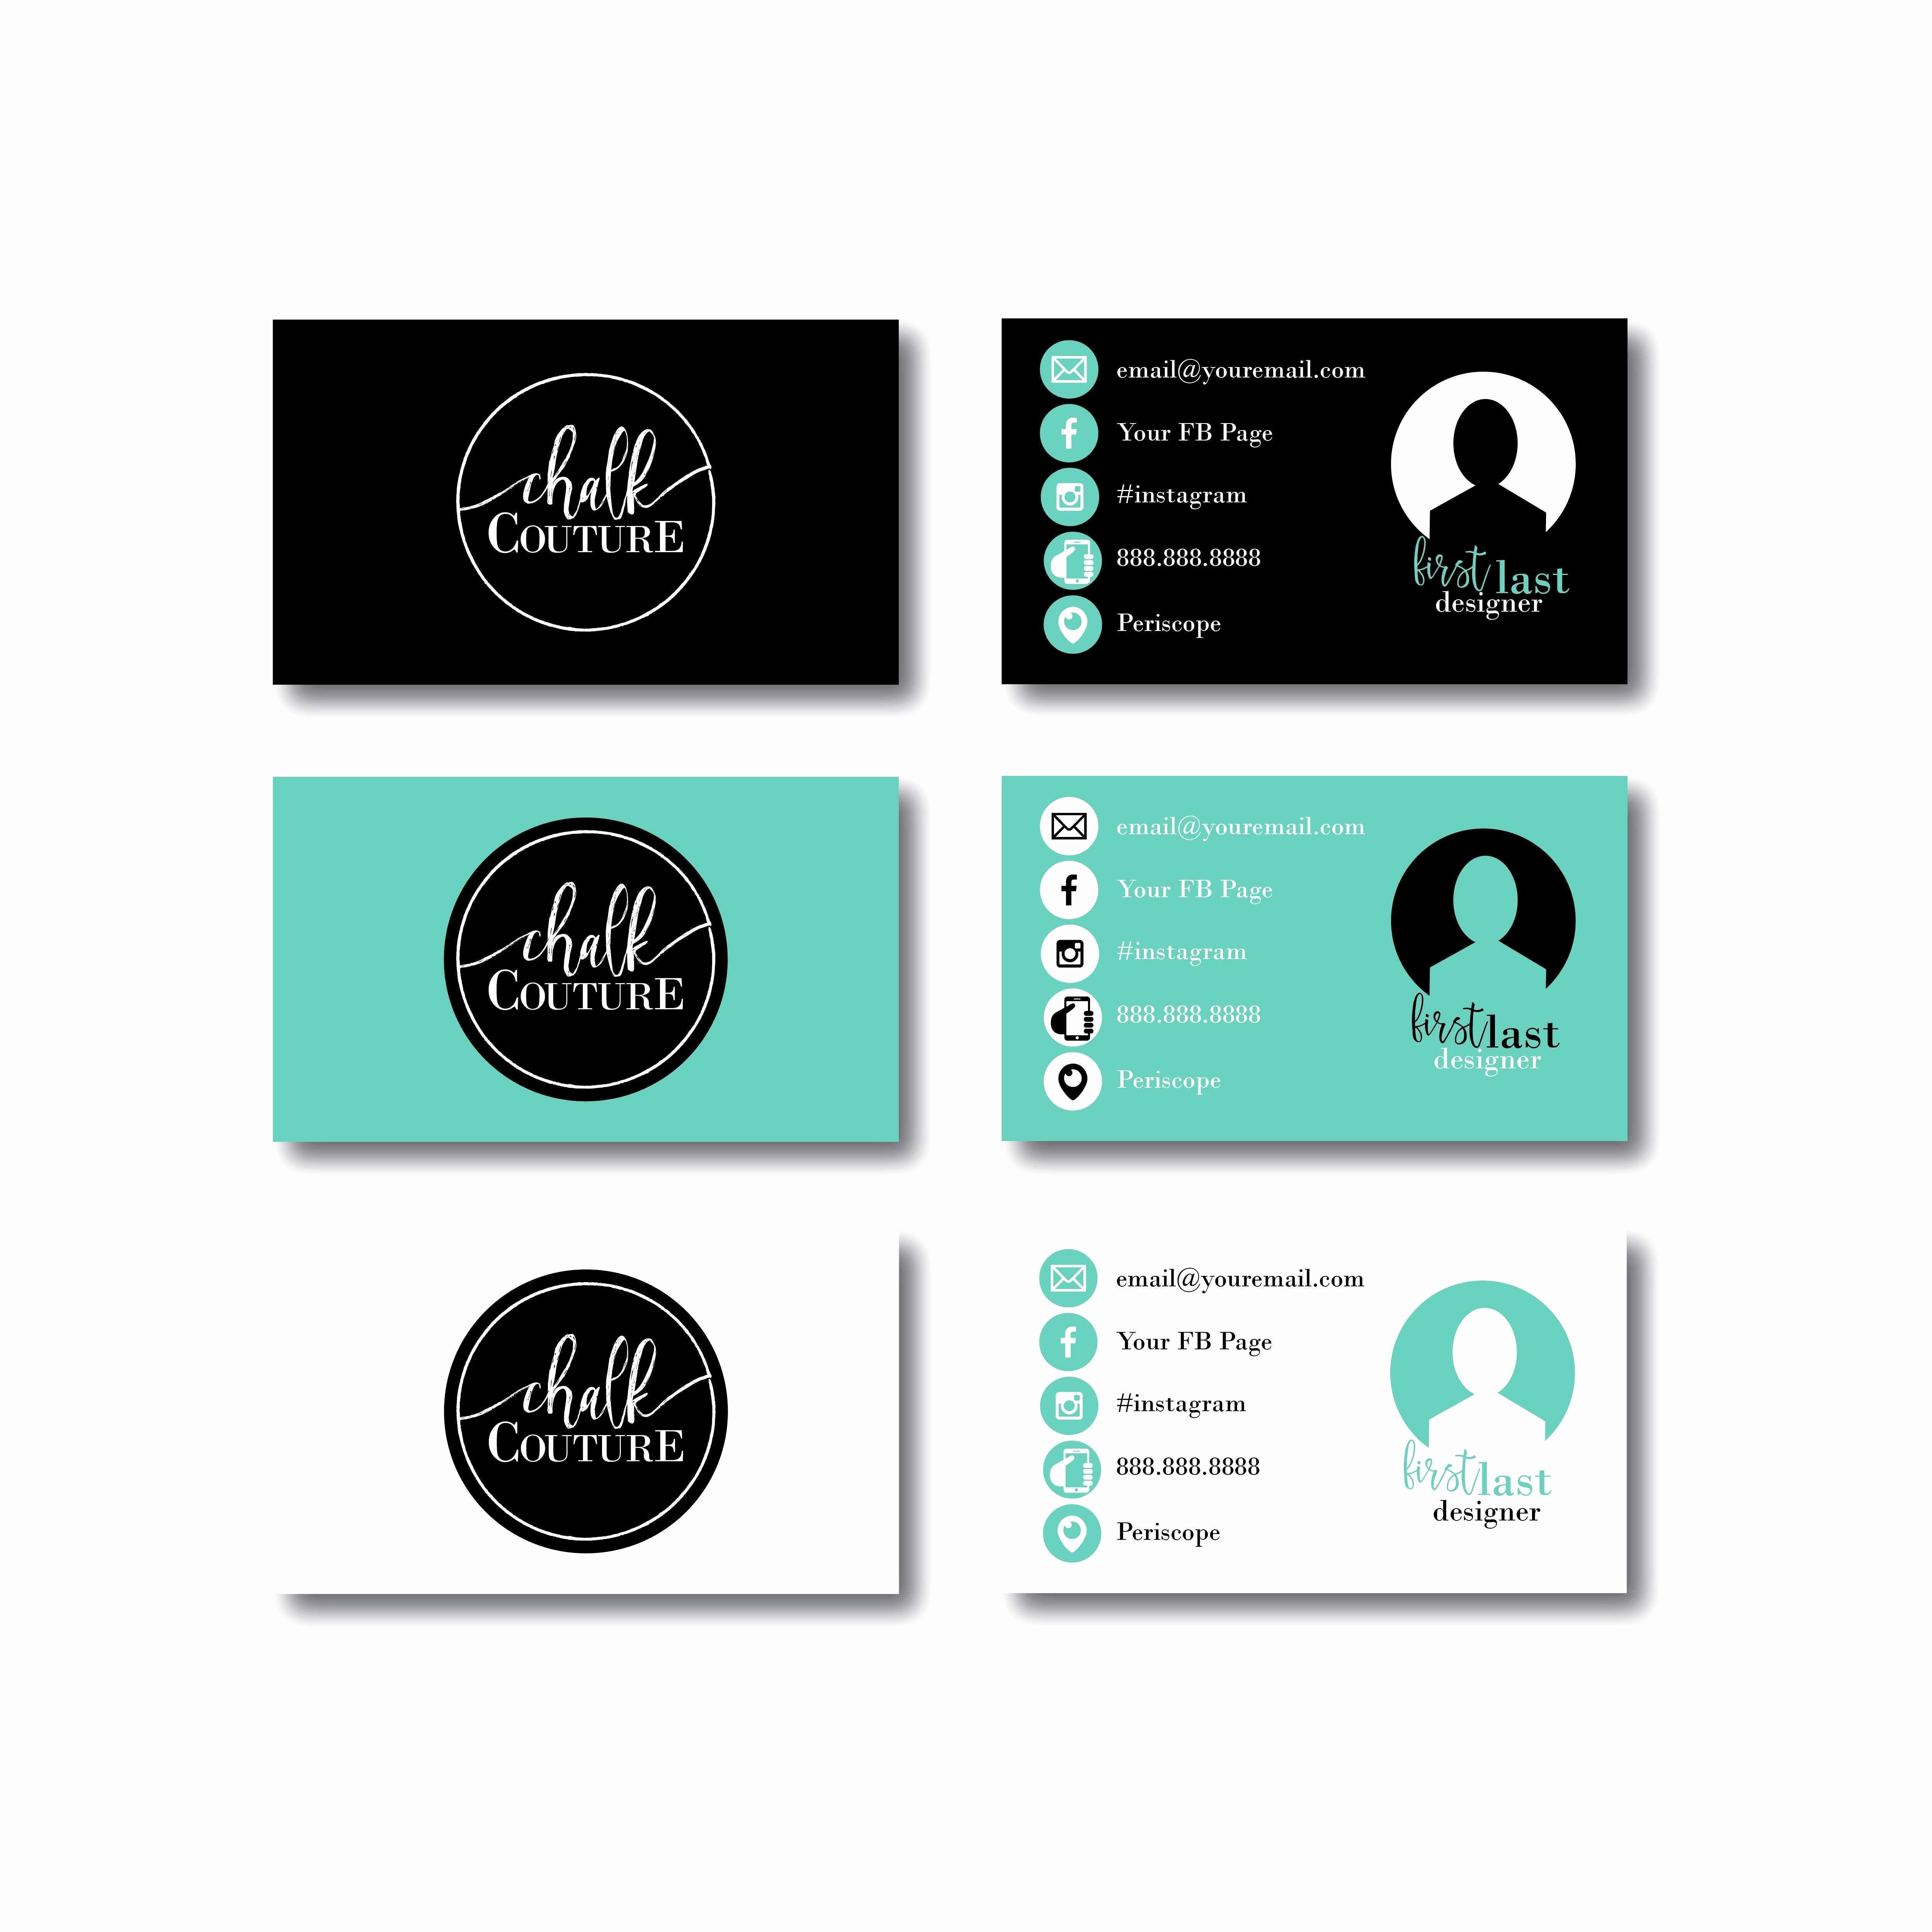 Instagram Icon For Business Card at Collection of